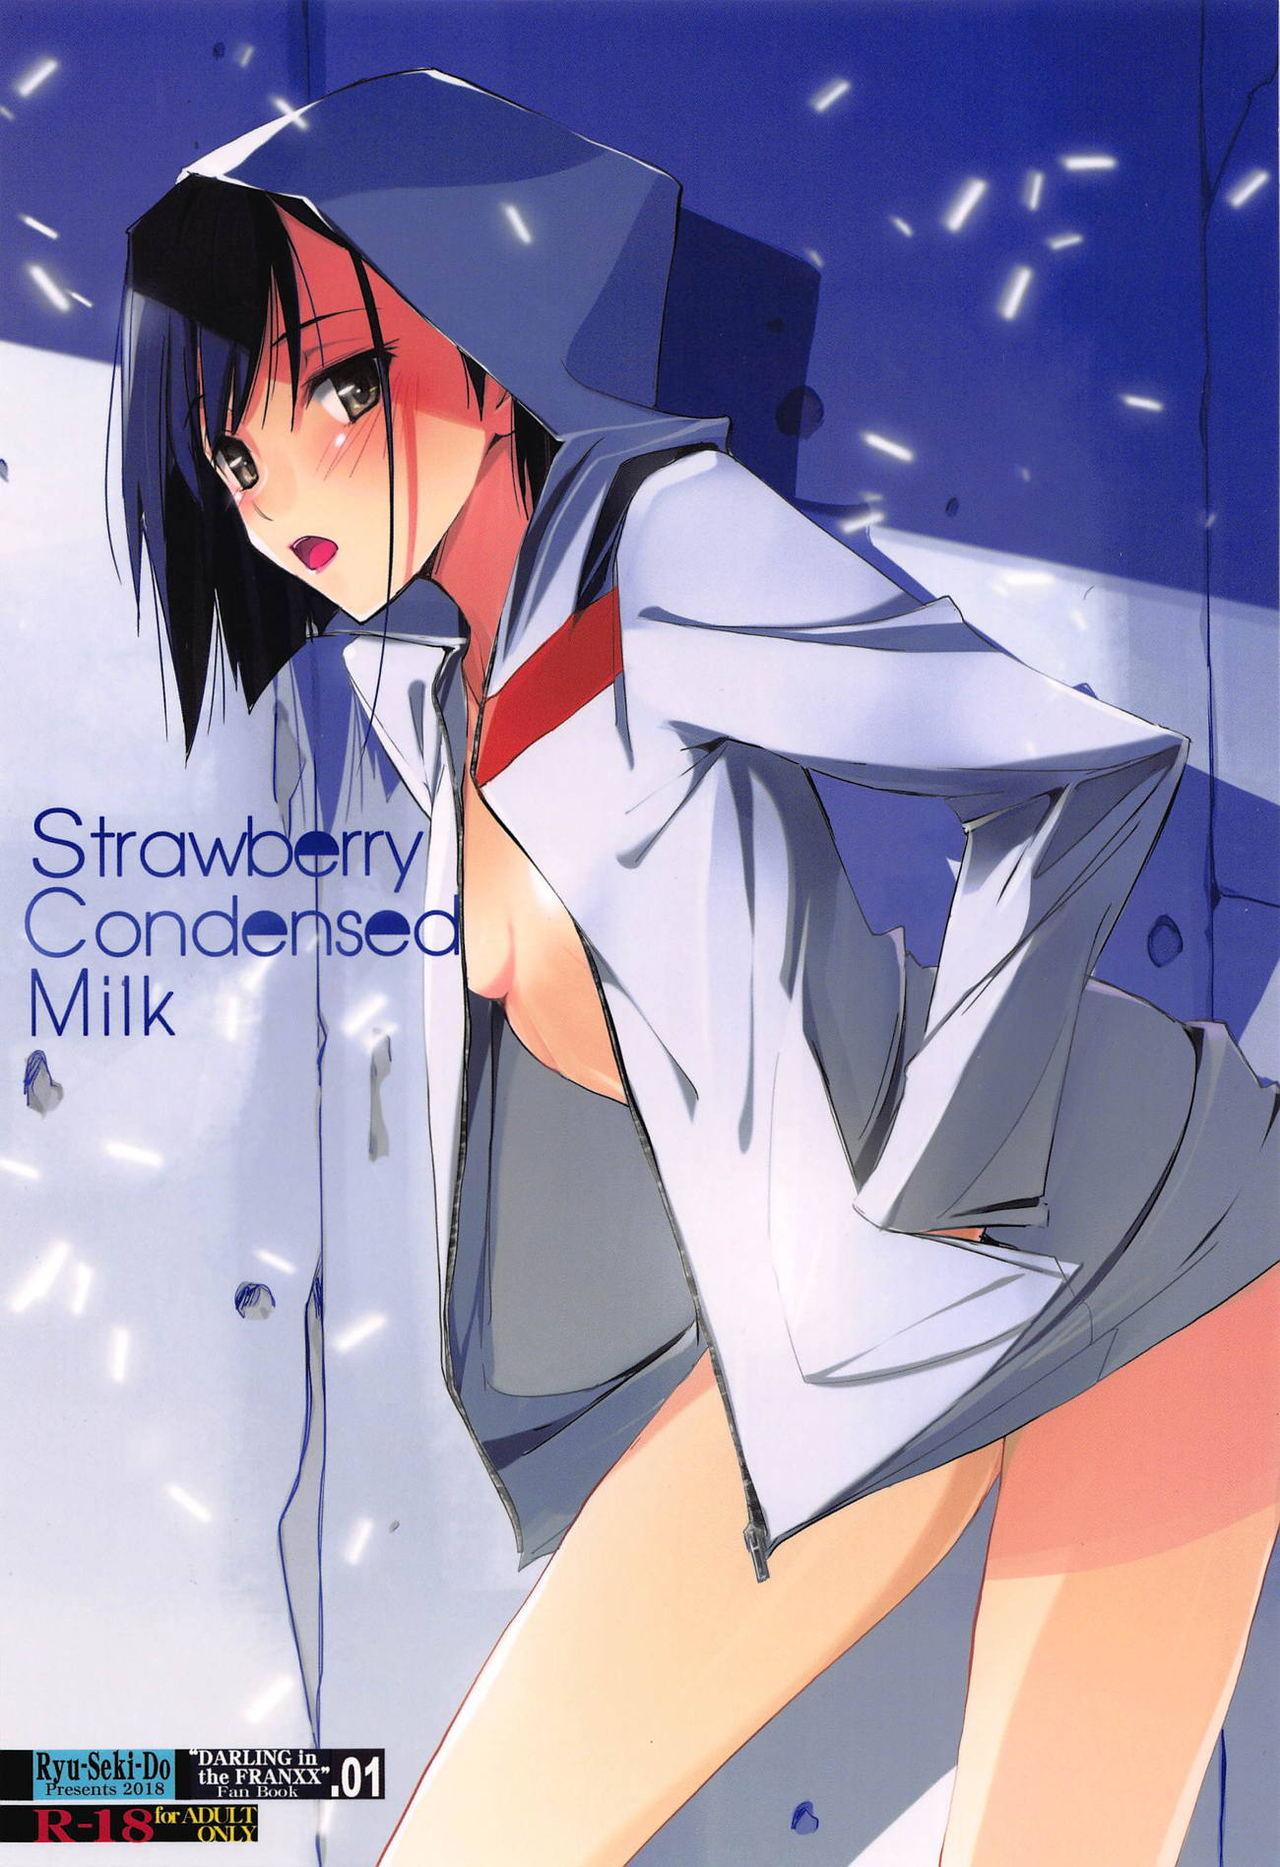 Lovers Strawberry Condensed Milk - Darling in the franxx Gay Medic - Picture 1